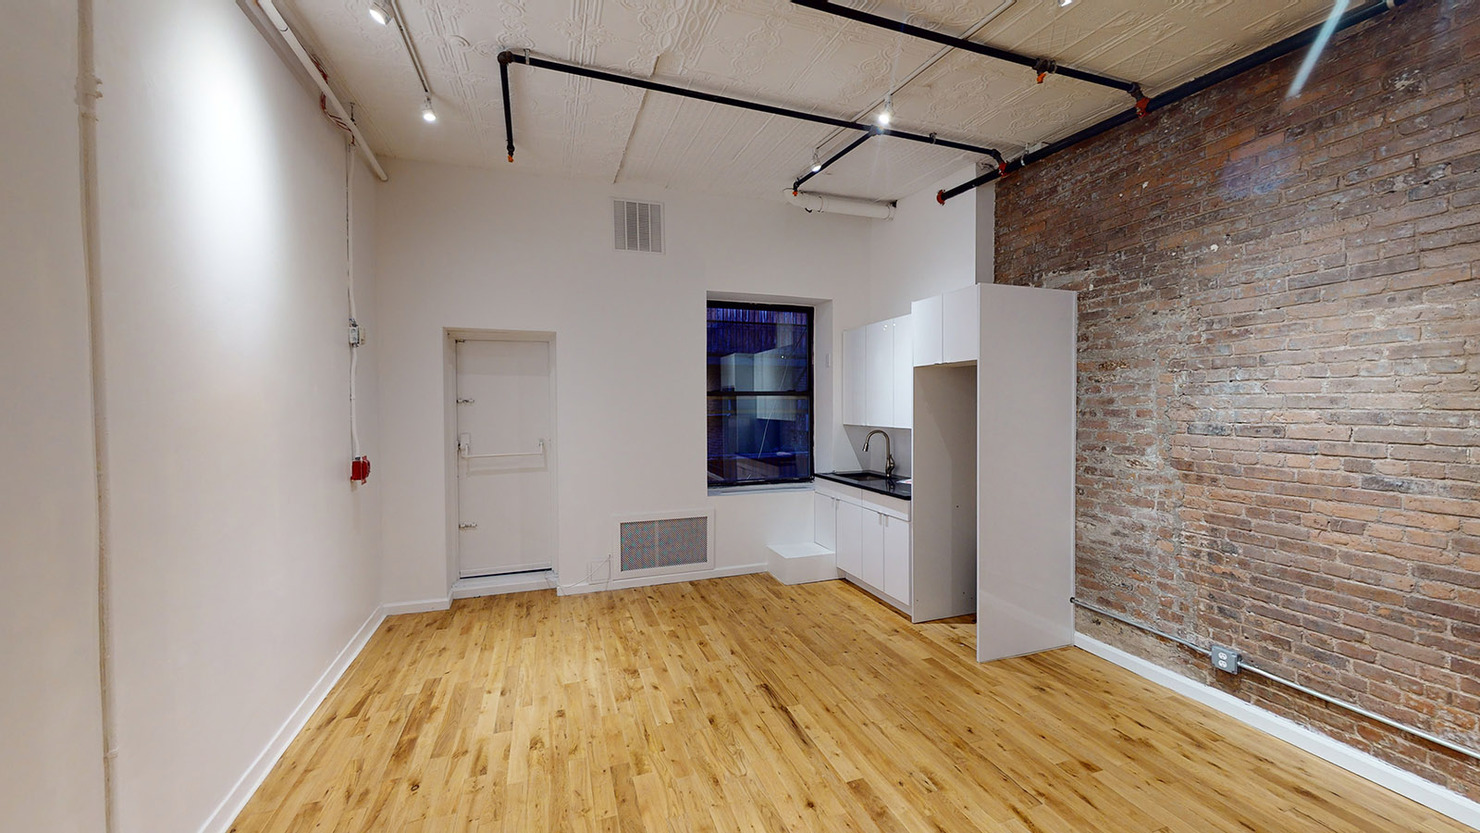 39 West 14th Street Office Space, Suite #501 - Entrance and Kitchenette